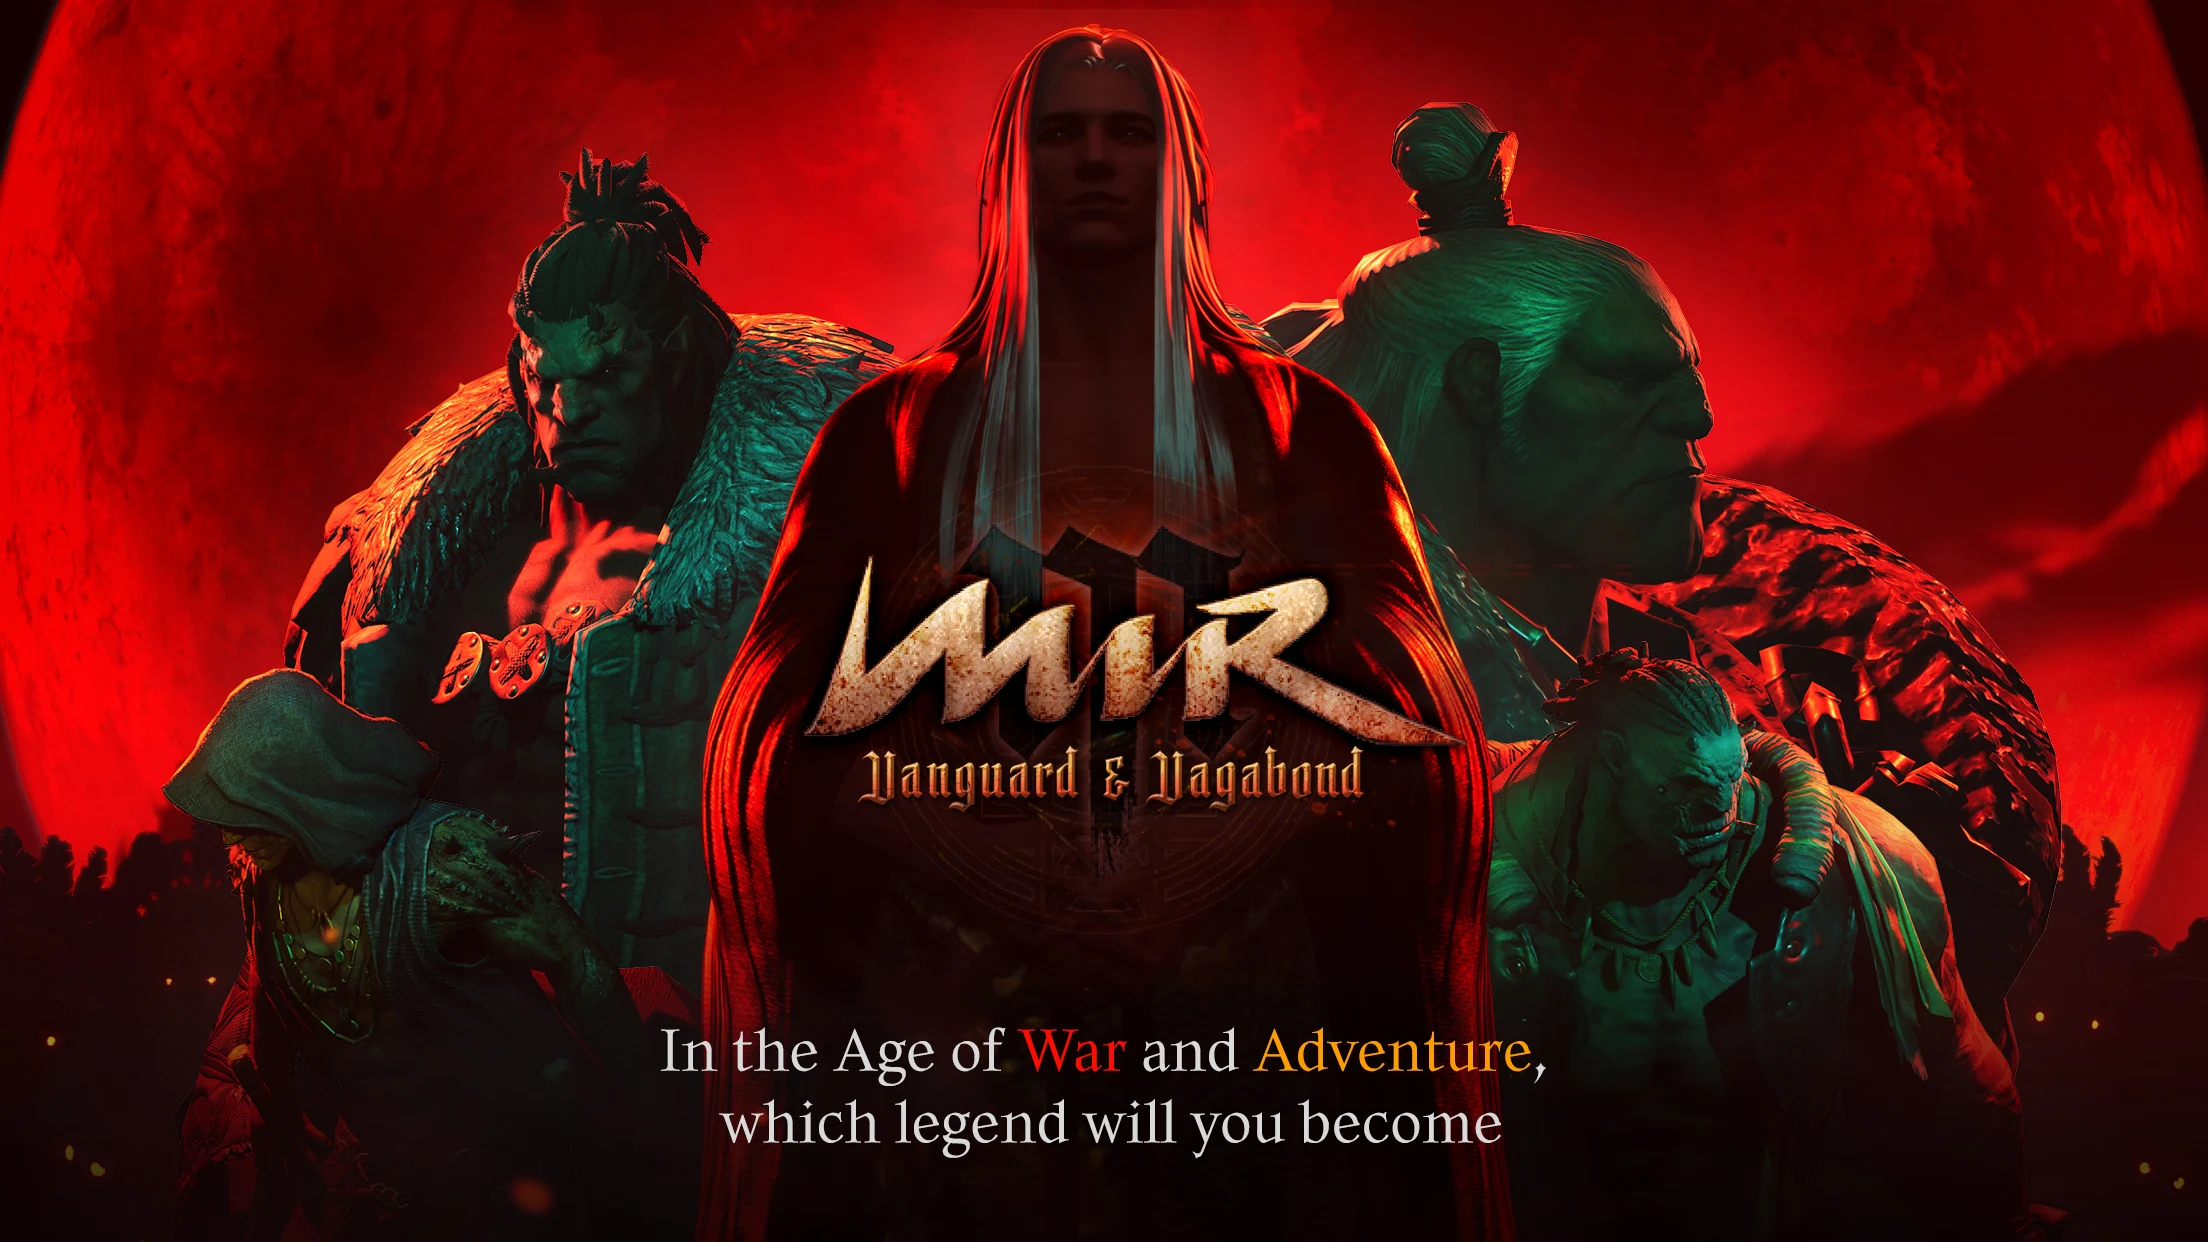 MIR M, the sequel to MIR4, opens pre-registration now and launchs on January 31st